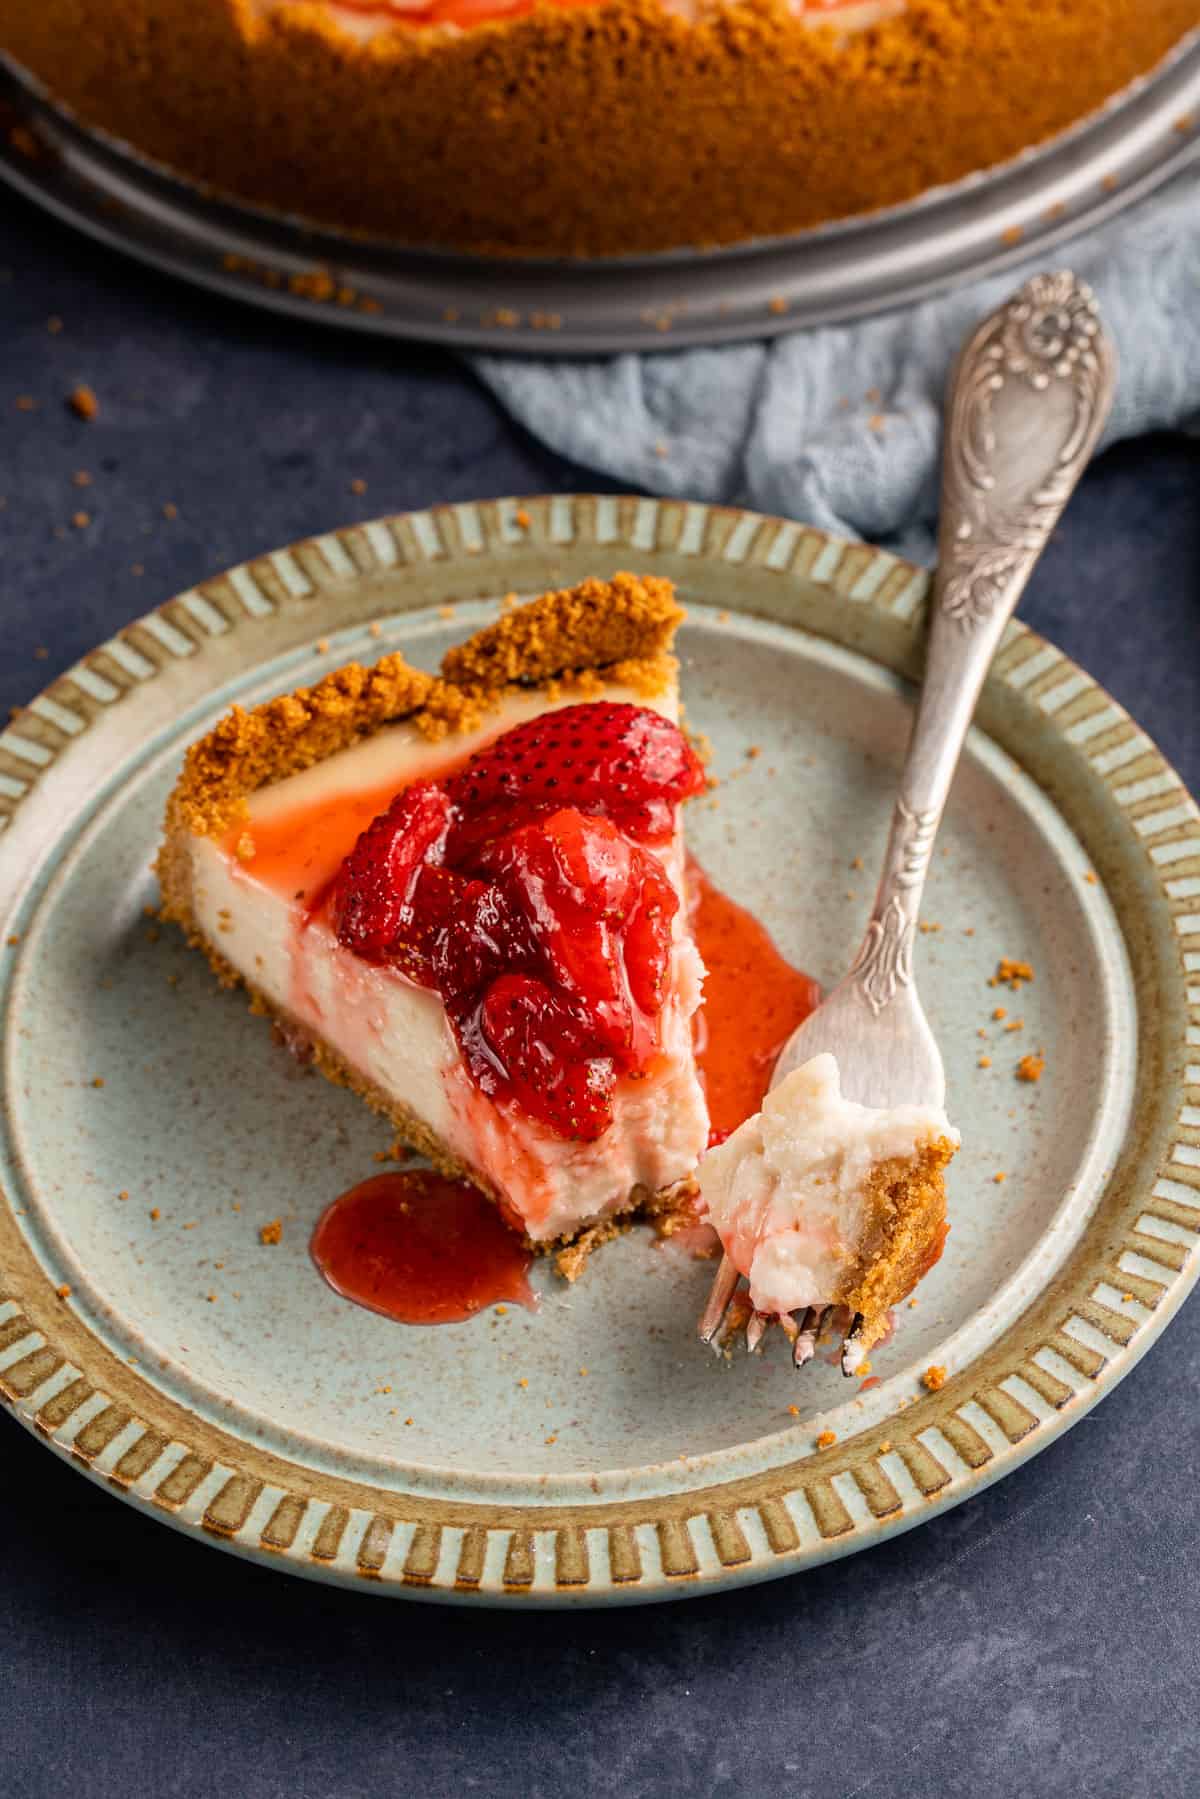 slice of vegan cheesecake with strawberry sauce on light blue plate